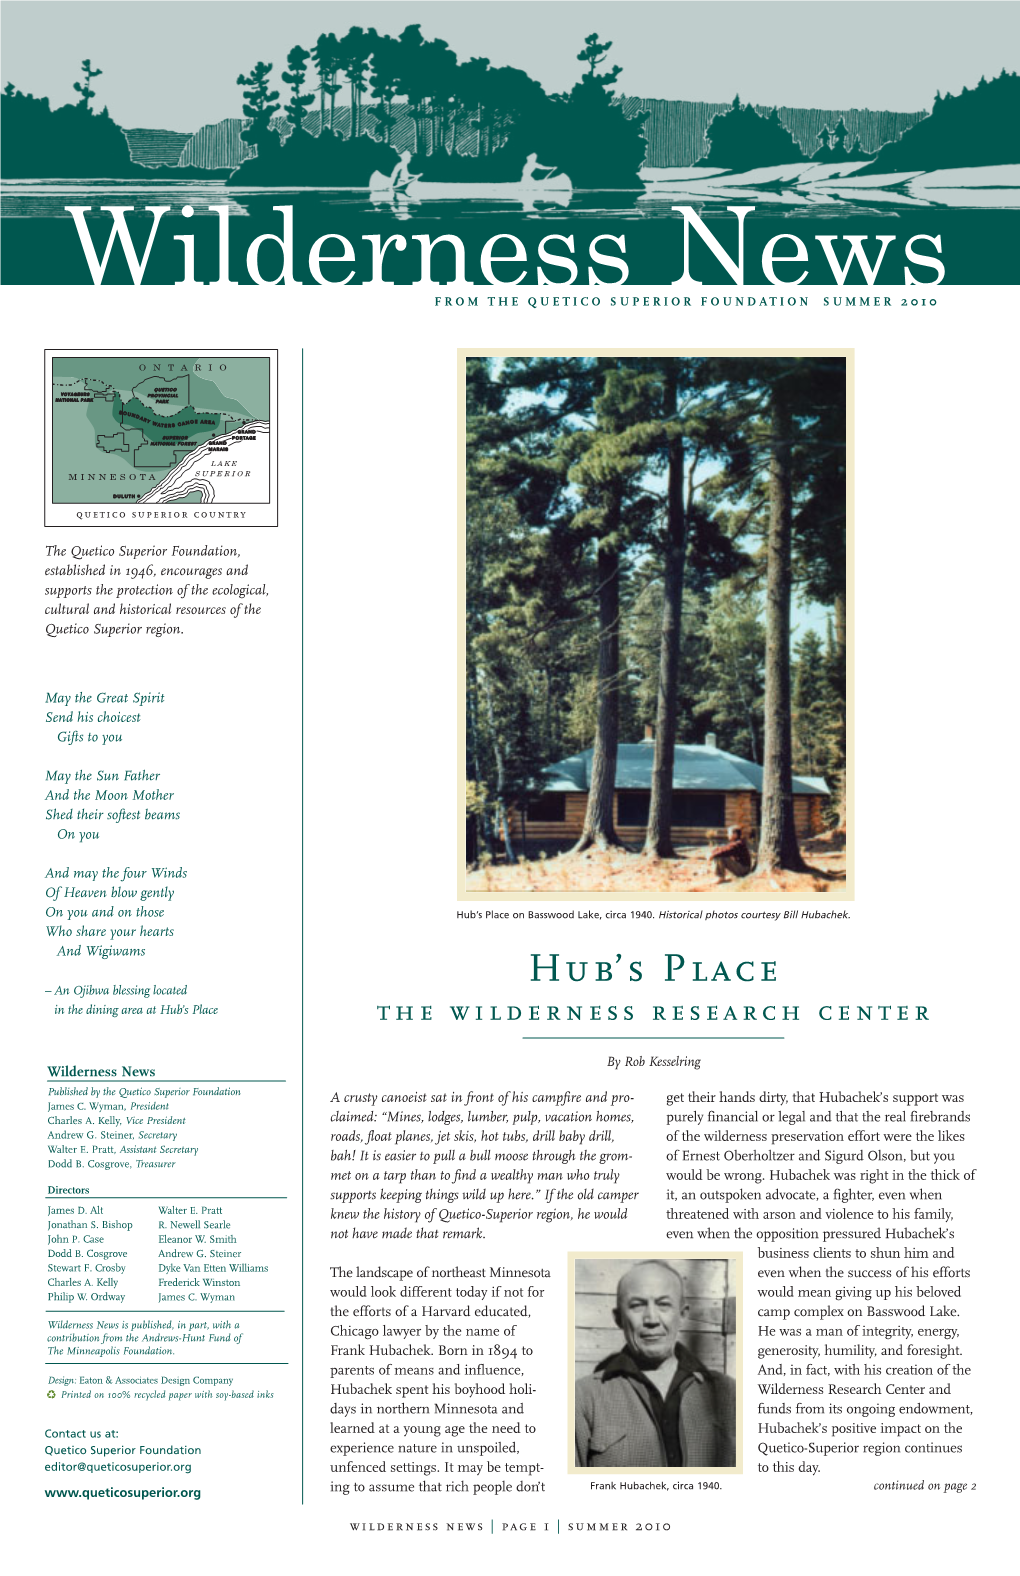 Wilderness News from the QUETICO SUPERIOR FOUNDATION SUMMER 2010